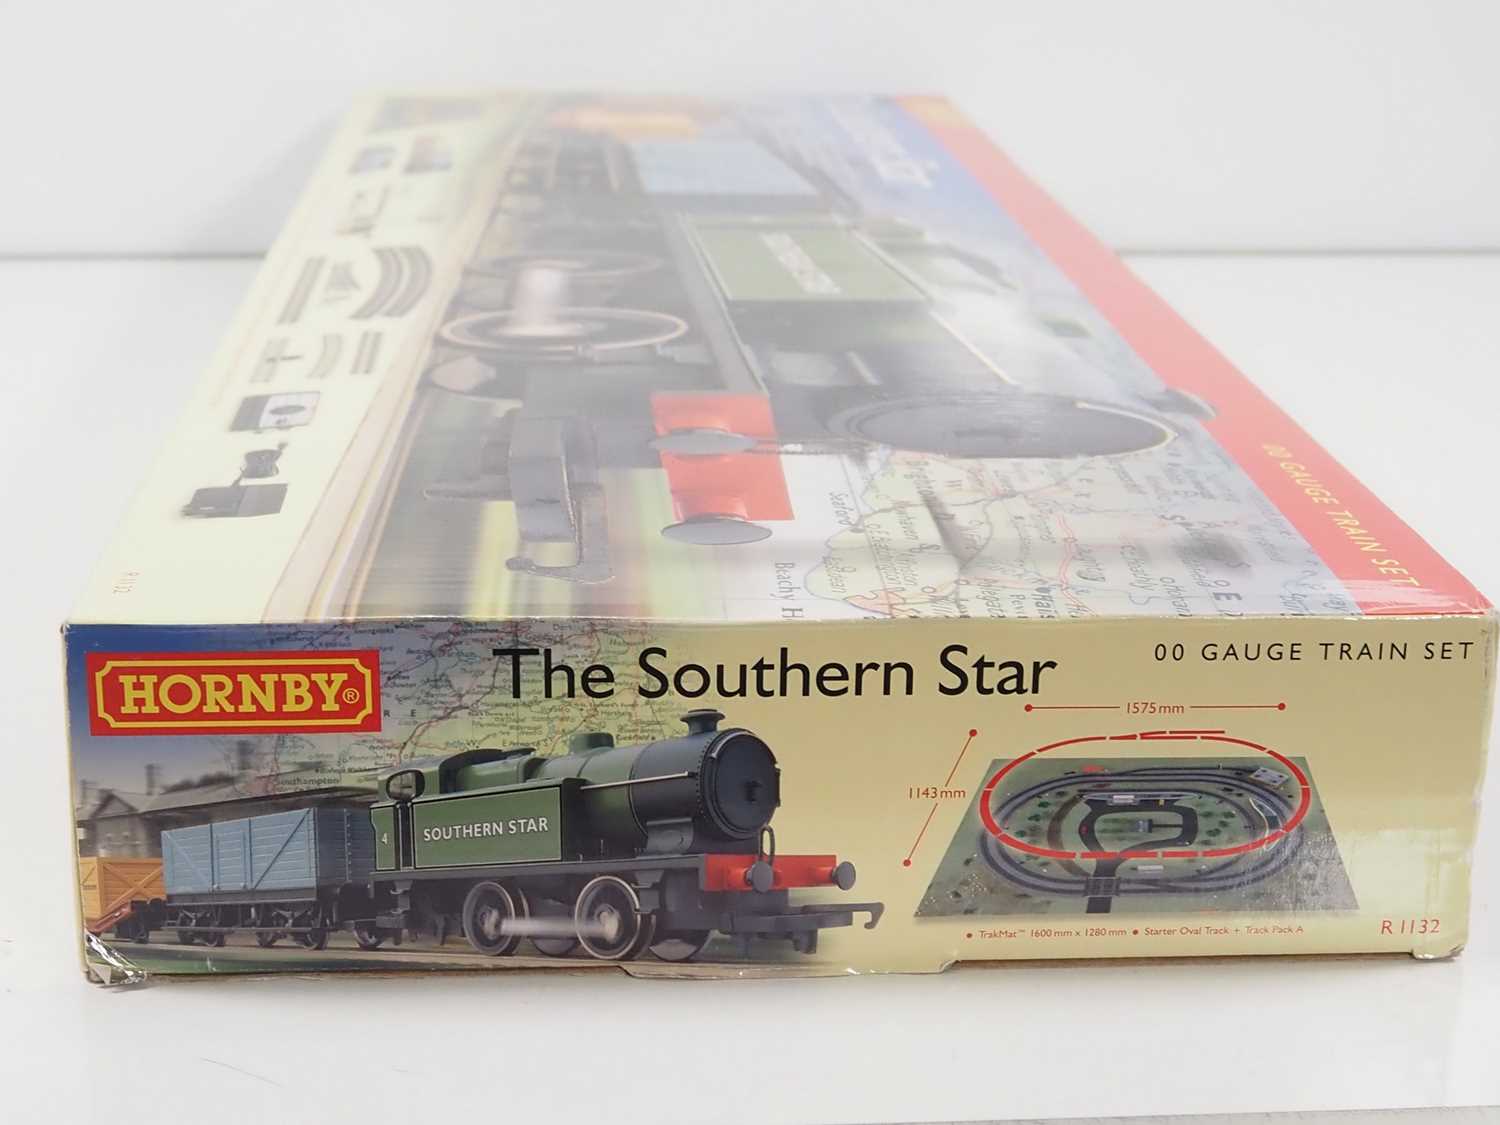 A HORNBY R1132 OO gauge 'The Southern Star' train set comprising a steam loco, wagons, coach and - Image 8 of 8